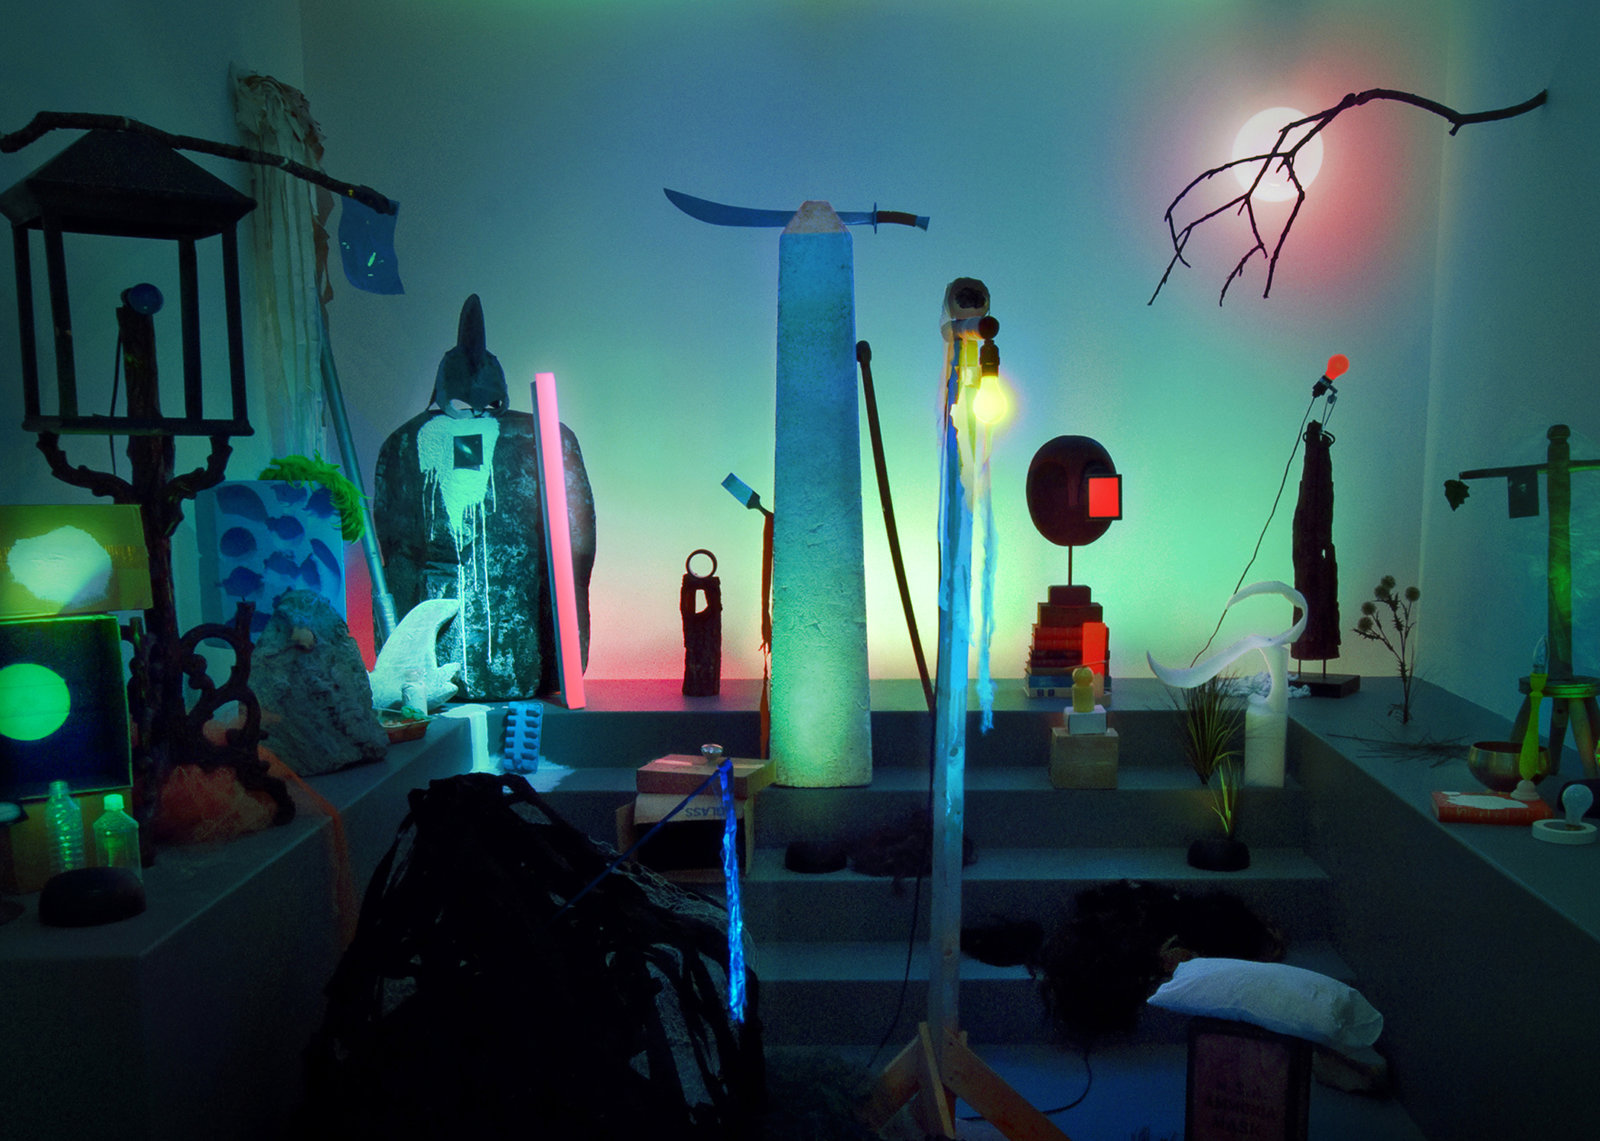 Geoffrey Farmer, Theatre of Cruelty, 2008, props, found objects, fabric, computer-controlled LED lighting system, speakers, framed photographs, dimensions variable